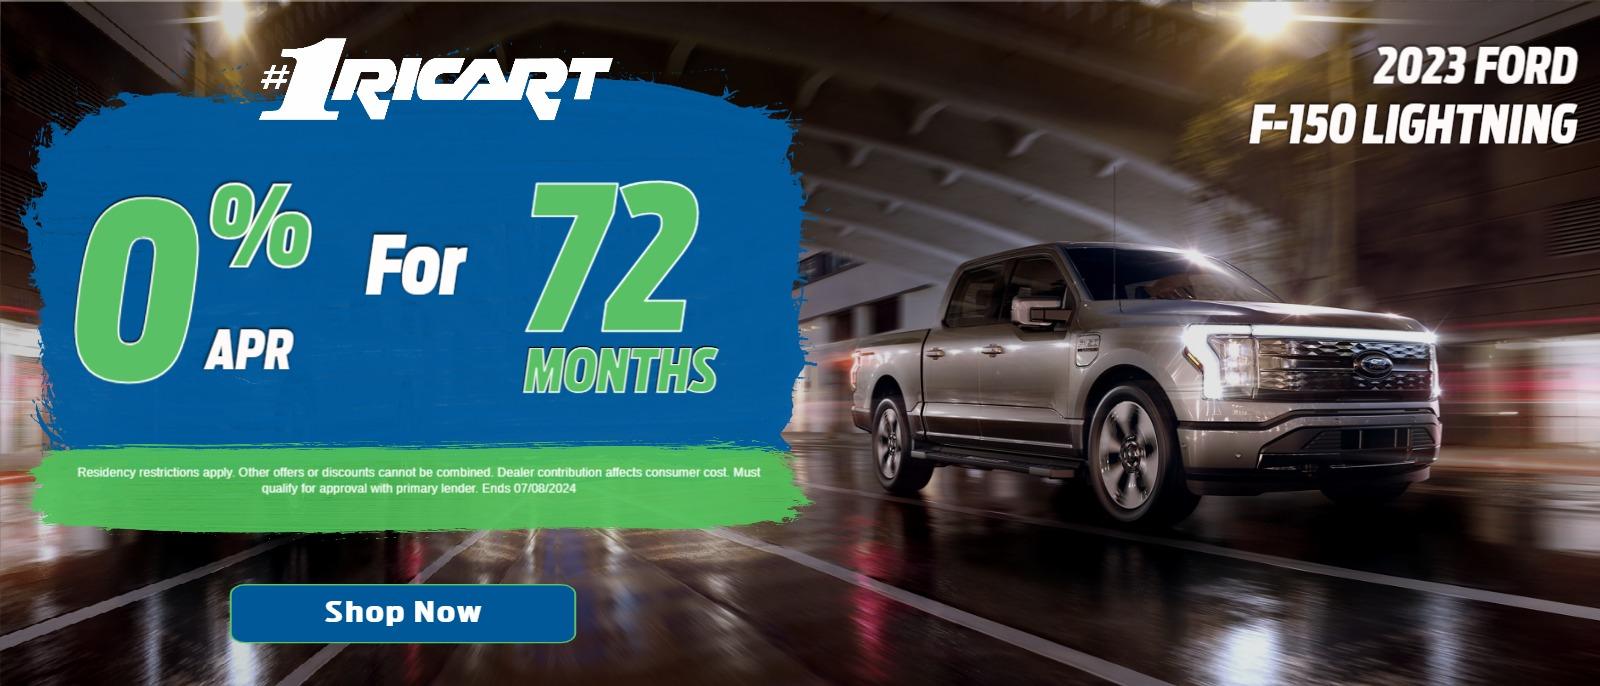 2023 Ford F-150 Lightning - 0% APR for 72 Months